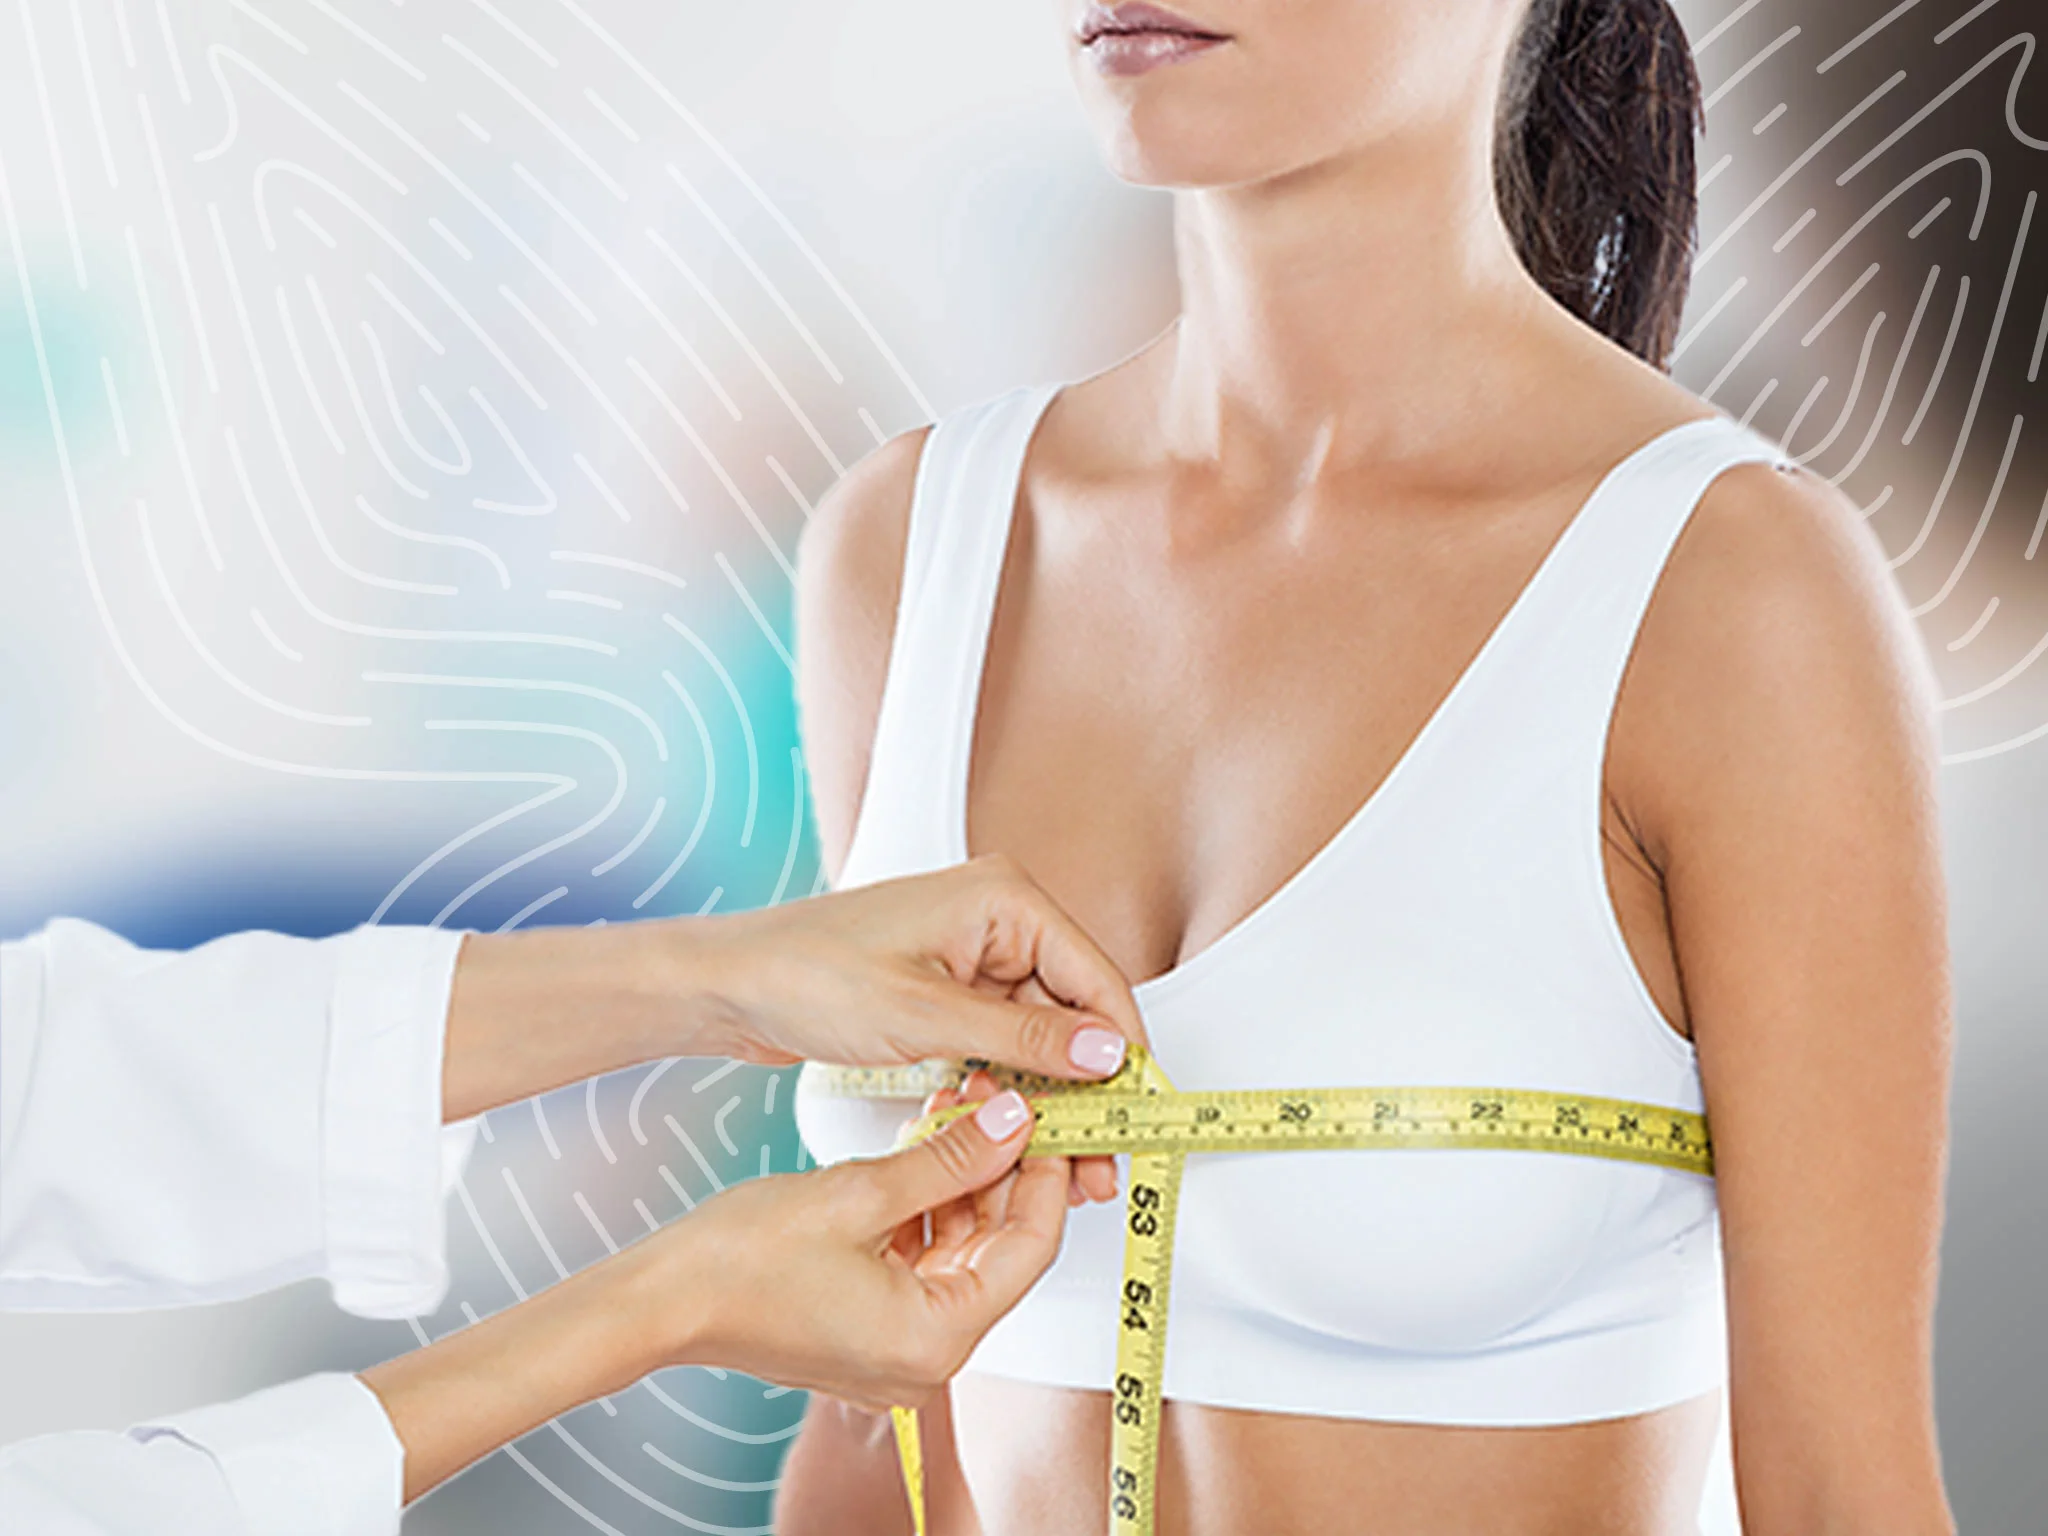 Large Breasts Causing Back Pain? Get Breast Reduction Surgery For